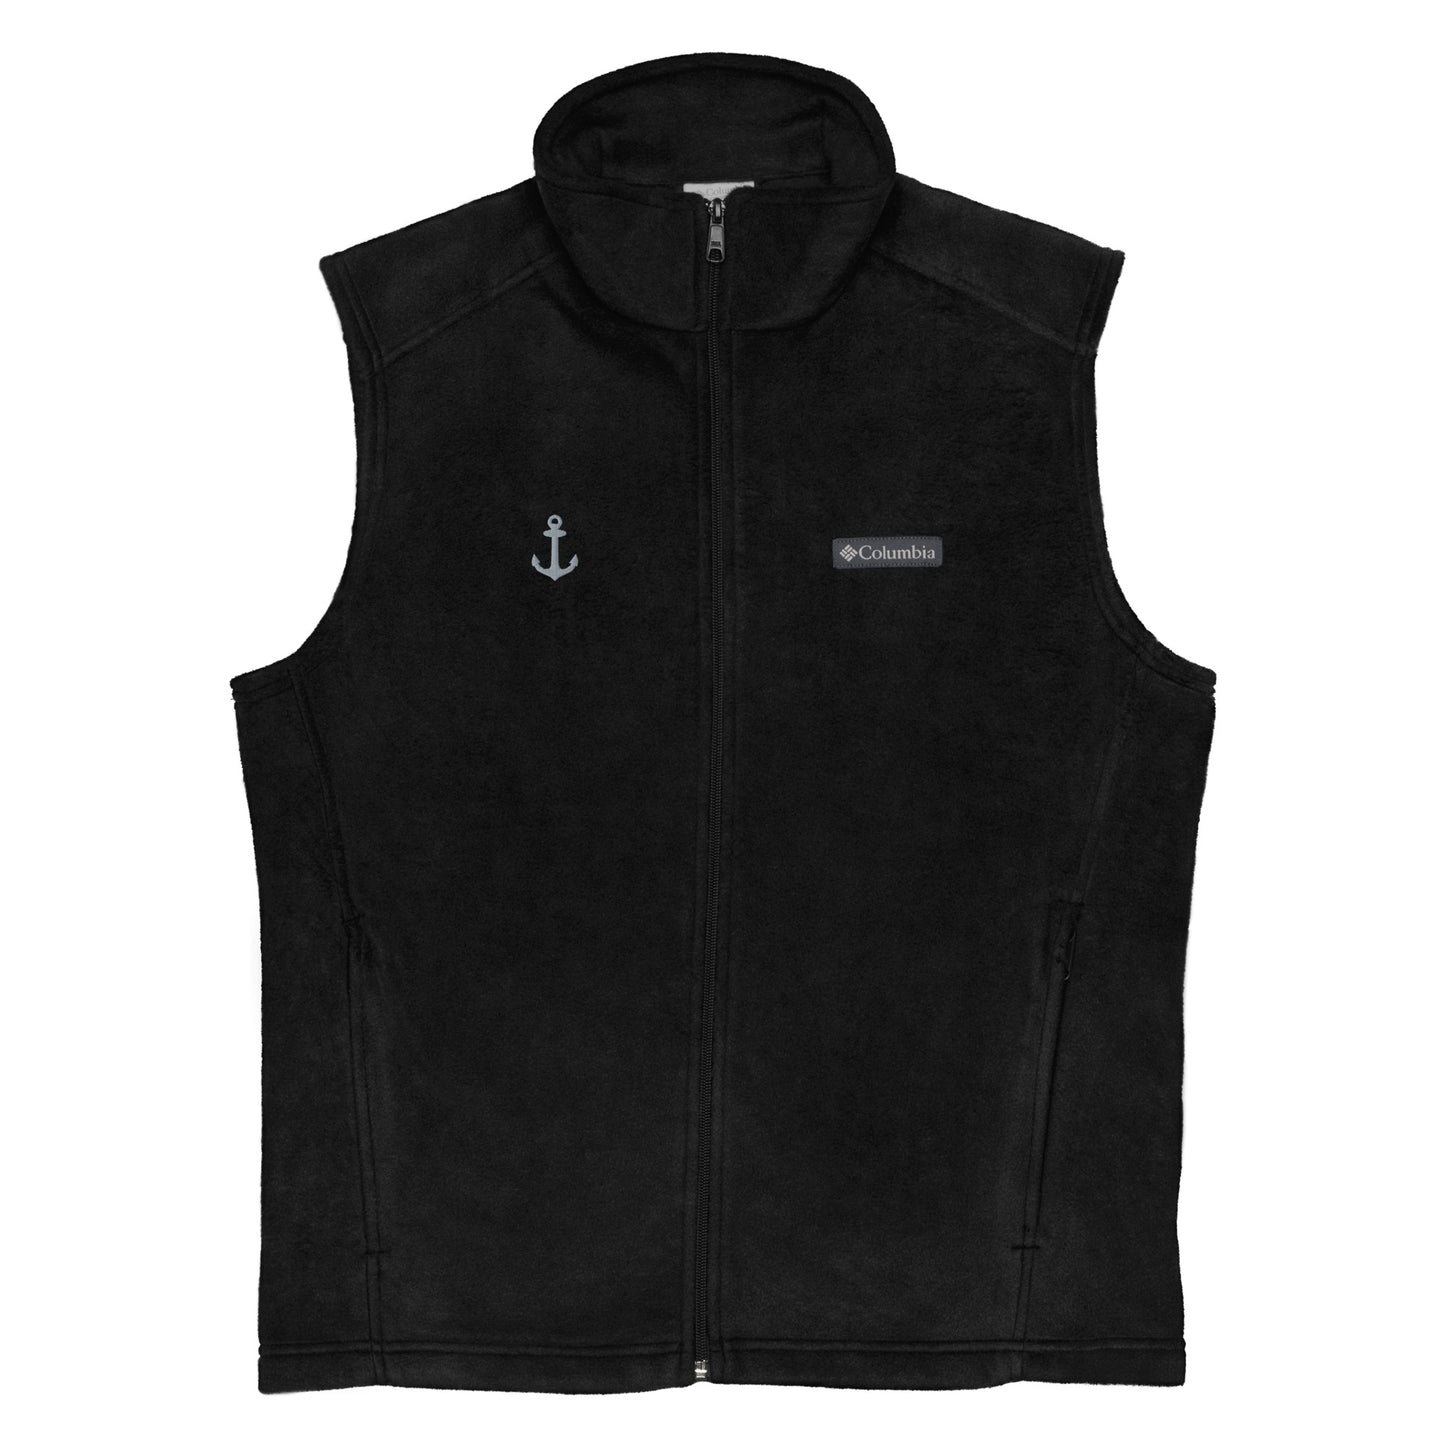 Men’s Columbia Fleece Vest With Pockets Embroidery Ship Anchor Navy